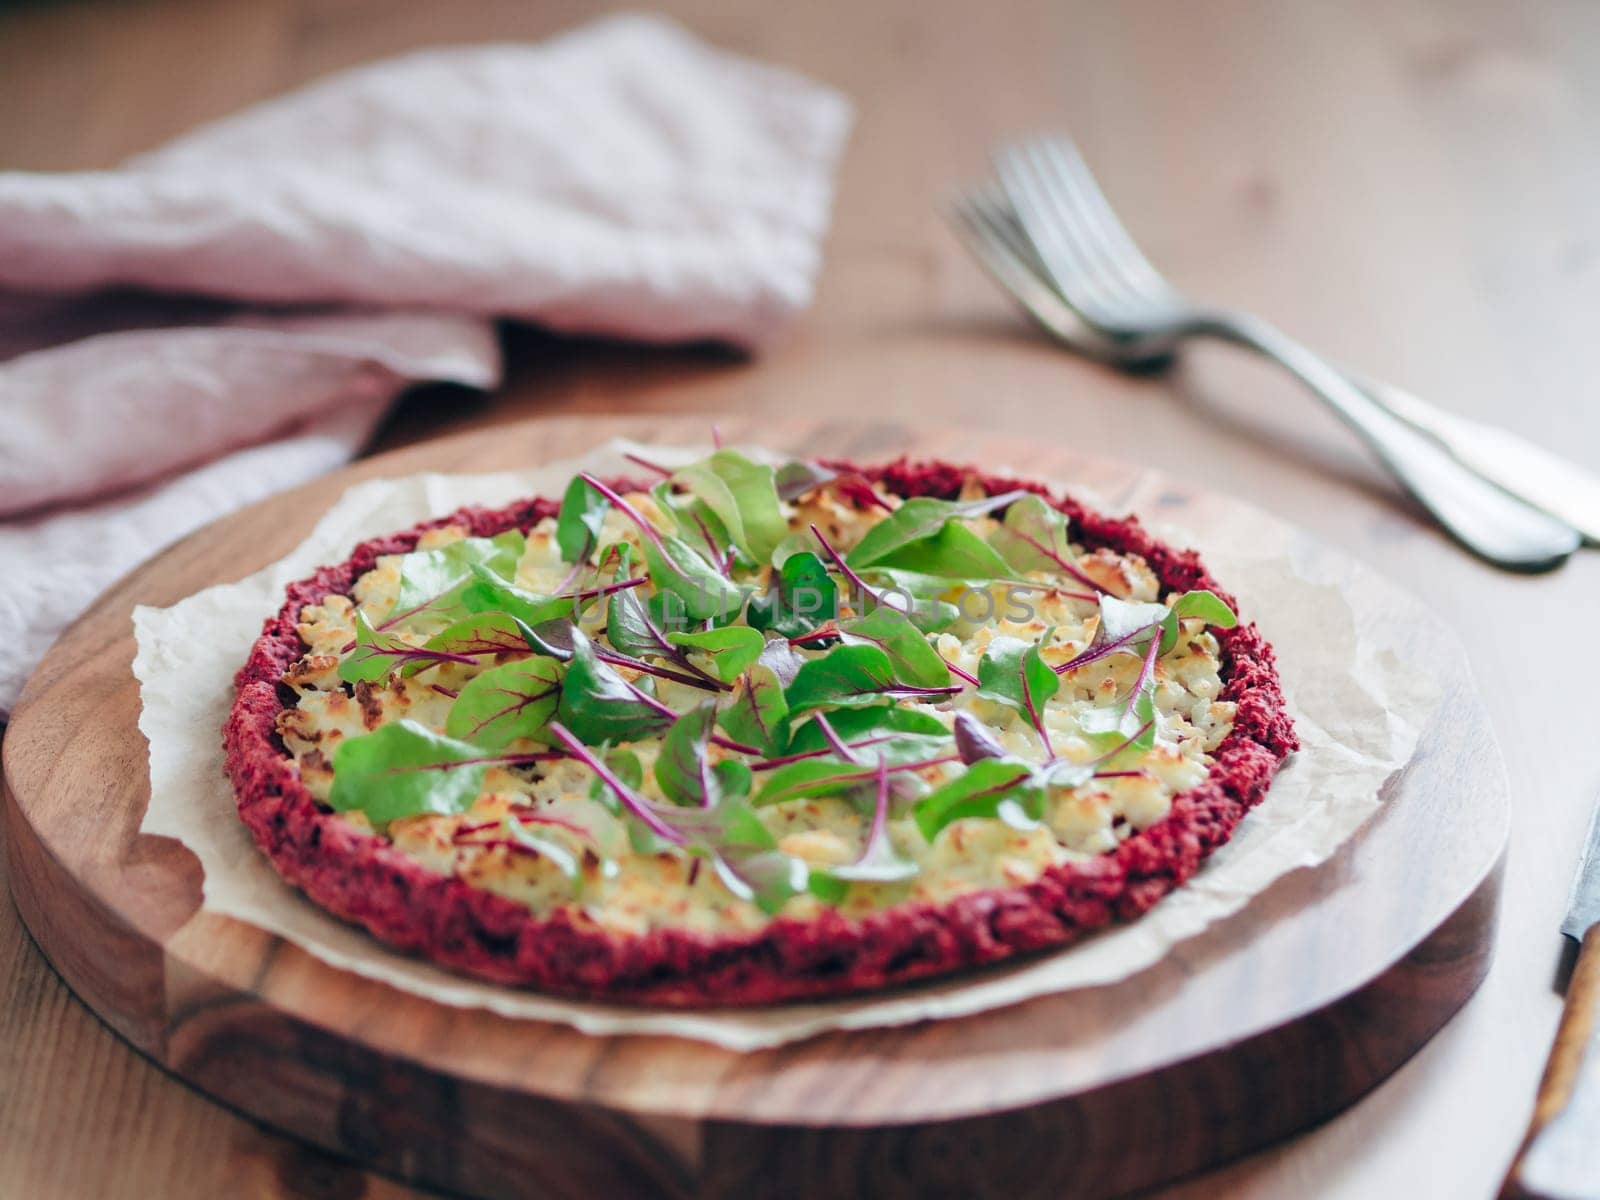 beetroot pizza crust with fresh swiss chard or mangold, beetroot leaves. Ideas and recipes for vegan snack.Egg-free pizza crust with chia seeds and wholegrain brown rice flour. Copy space. Shallow DOF